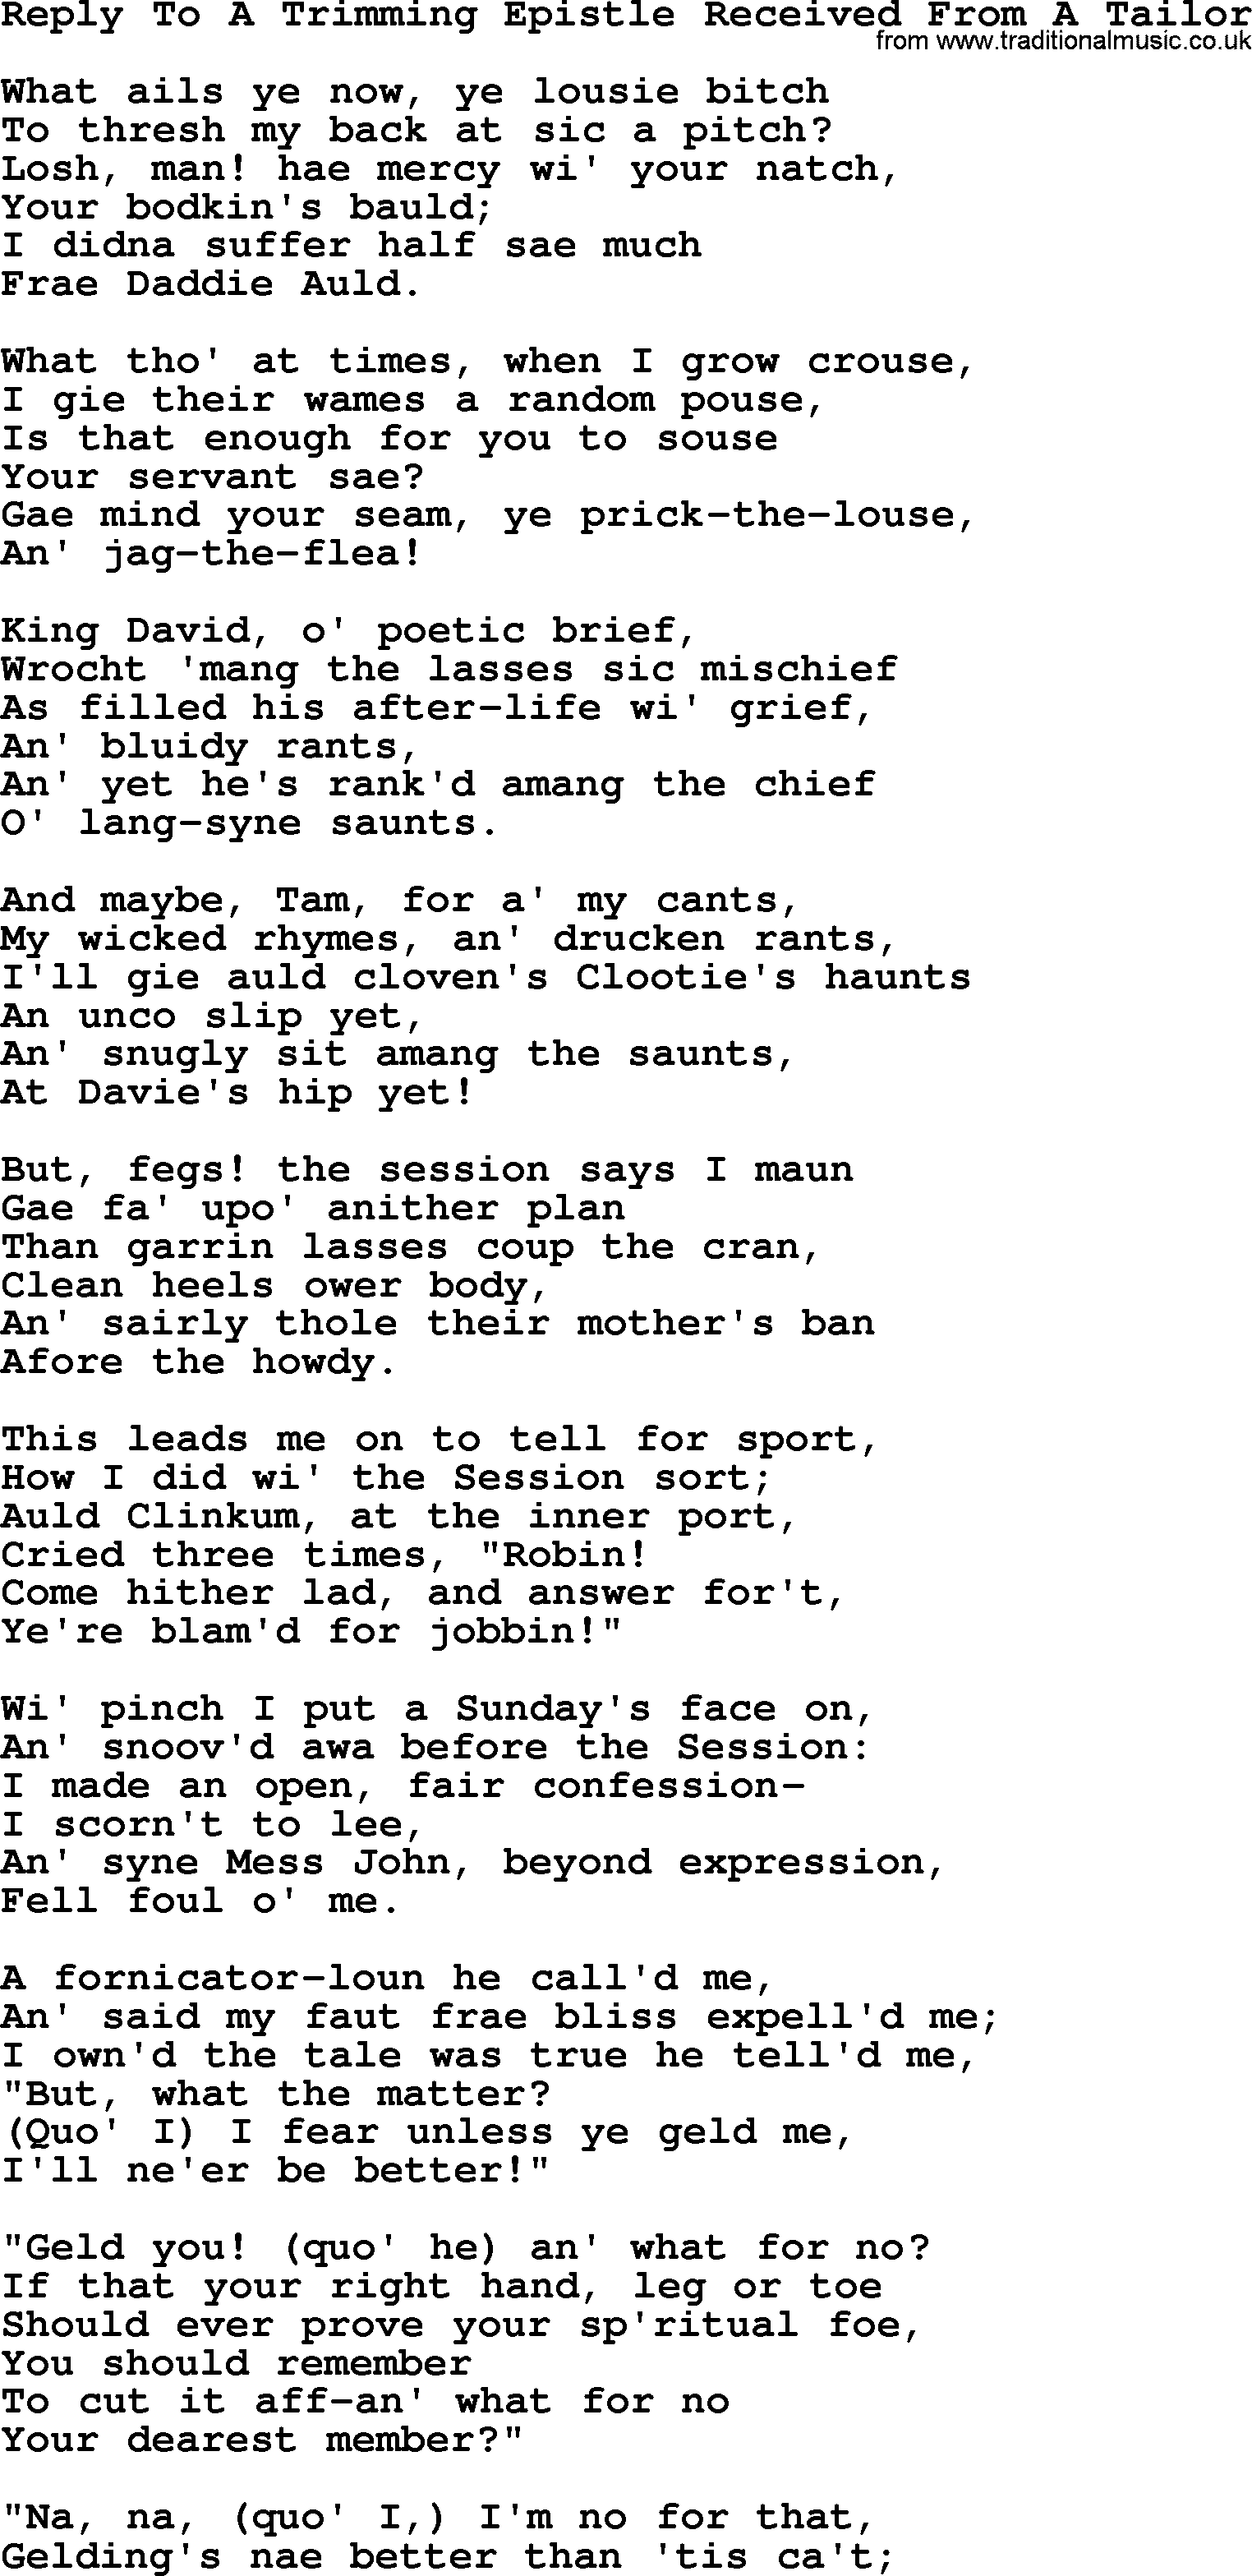 Robert Burns Songs & Lyrics: Reply To A Trimming Epistle Received From A Tailor